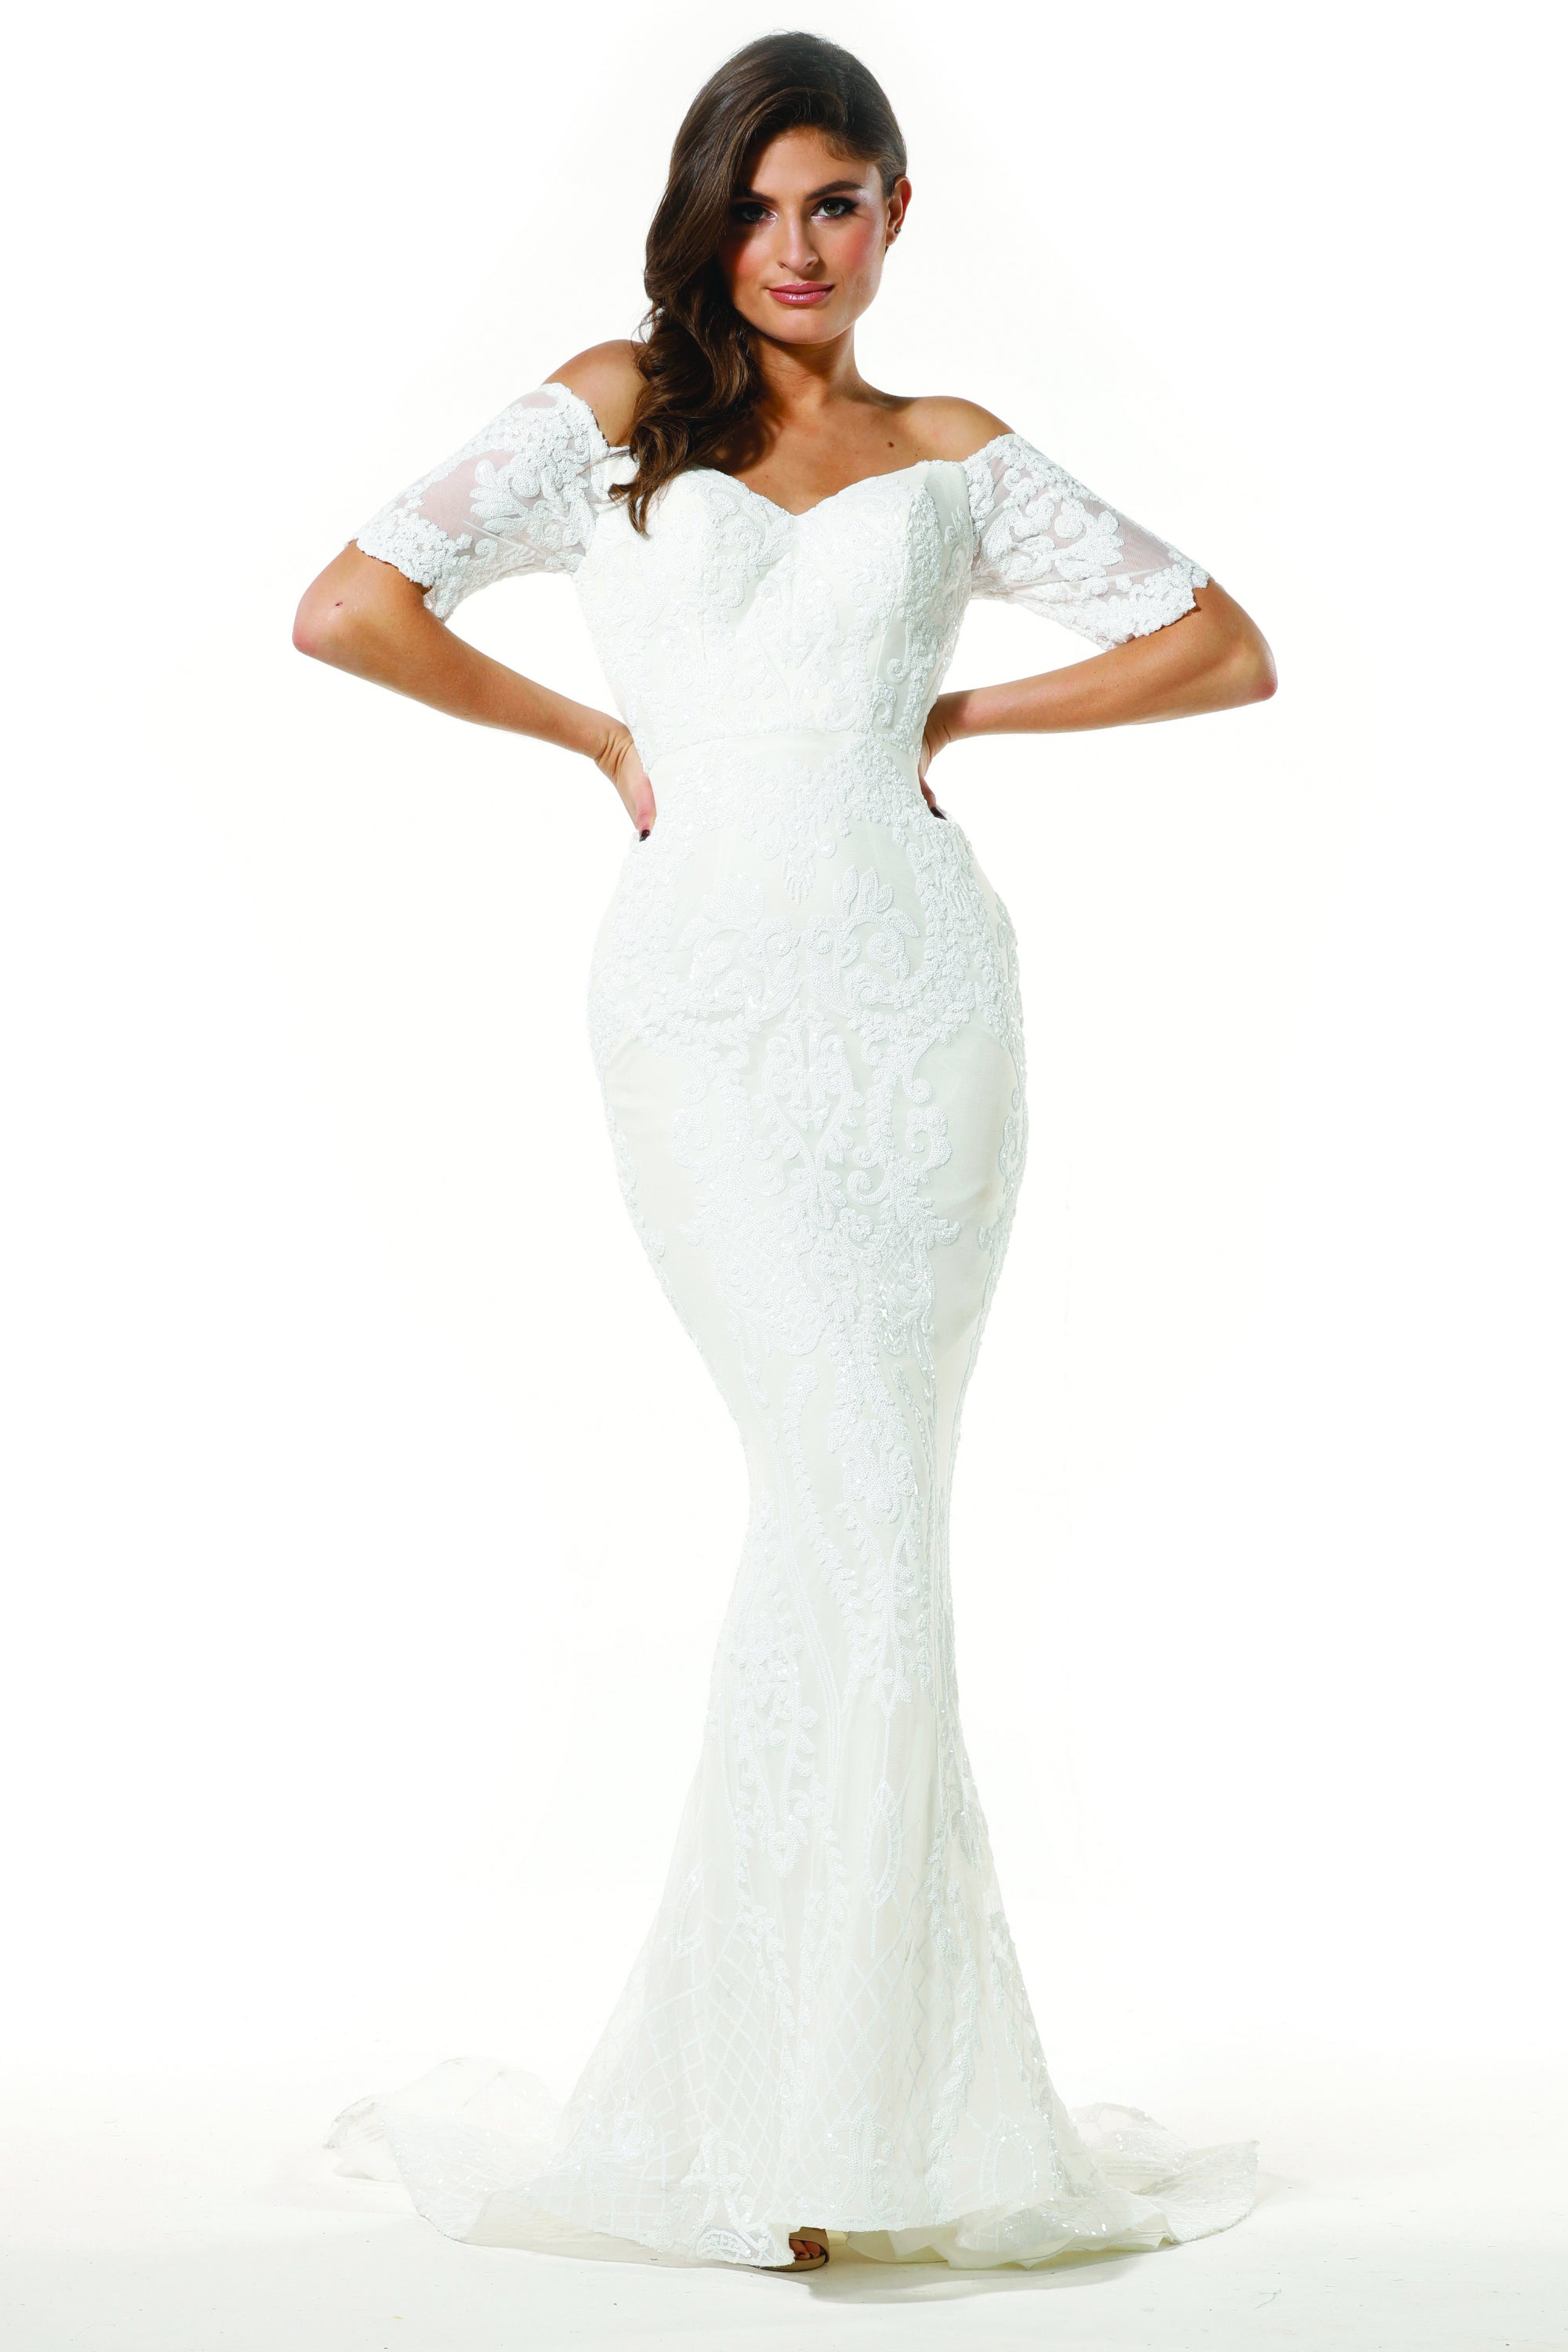 Tinaholy Couture Designer T19005 White Stretch Sequin Formal Wedding Gown Dress Tina Holly Couture$ AfterPay Humm ZipPay LayBuy Sezzle